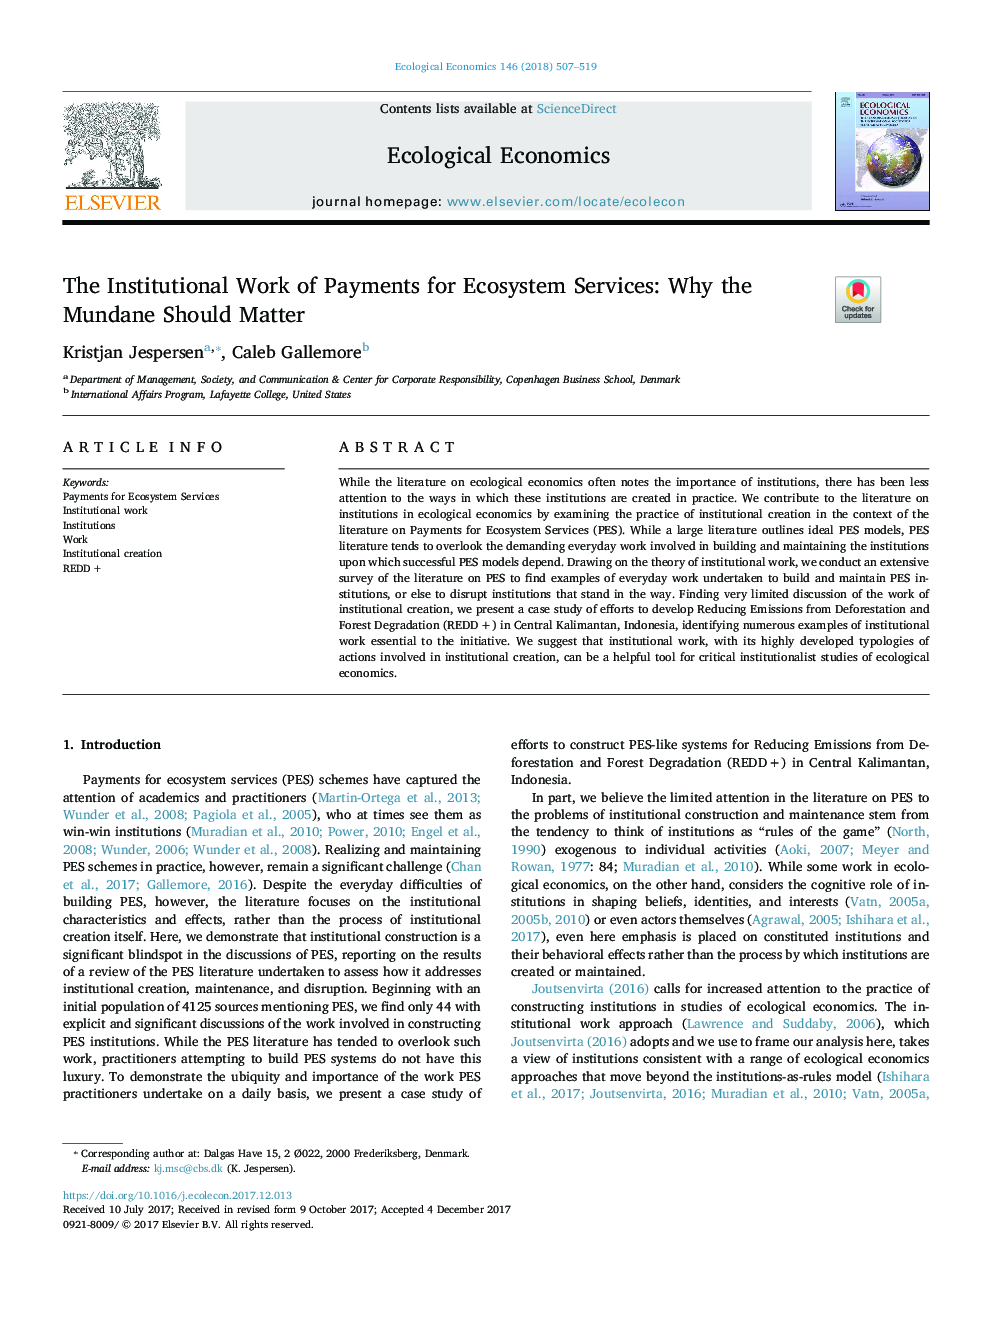 The Institutional Work of Payments for Ecosystem Services: Why the Mundane Should Matter